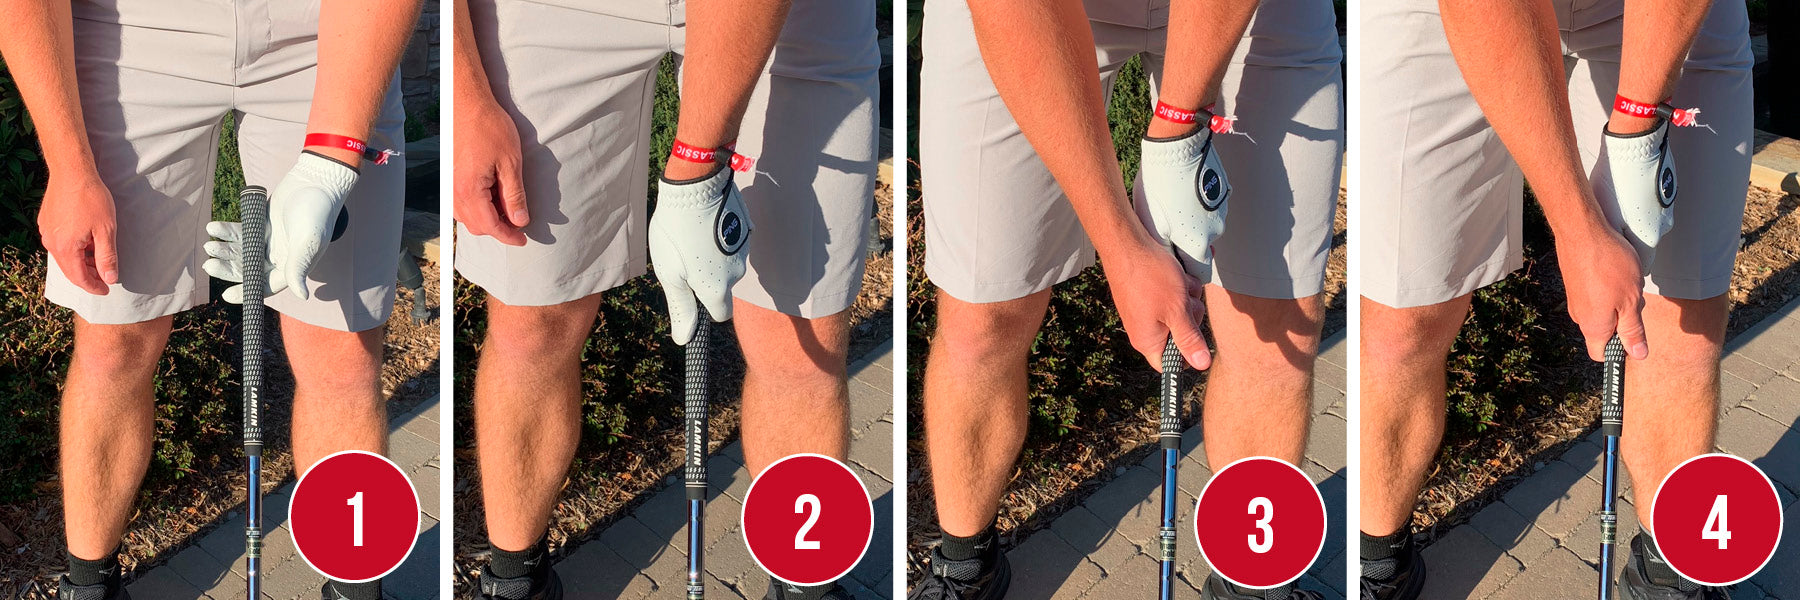 grip example to increase swing speed in golf